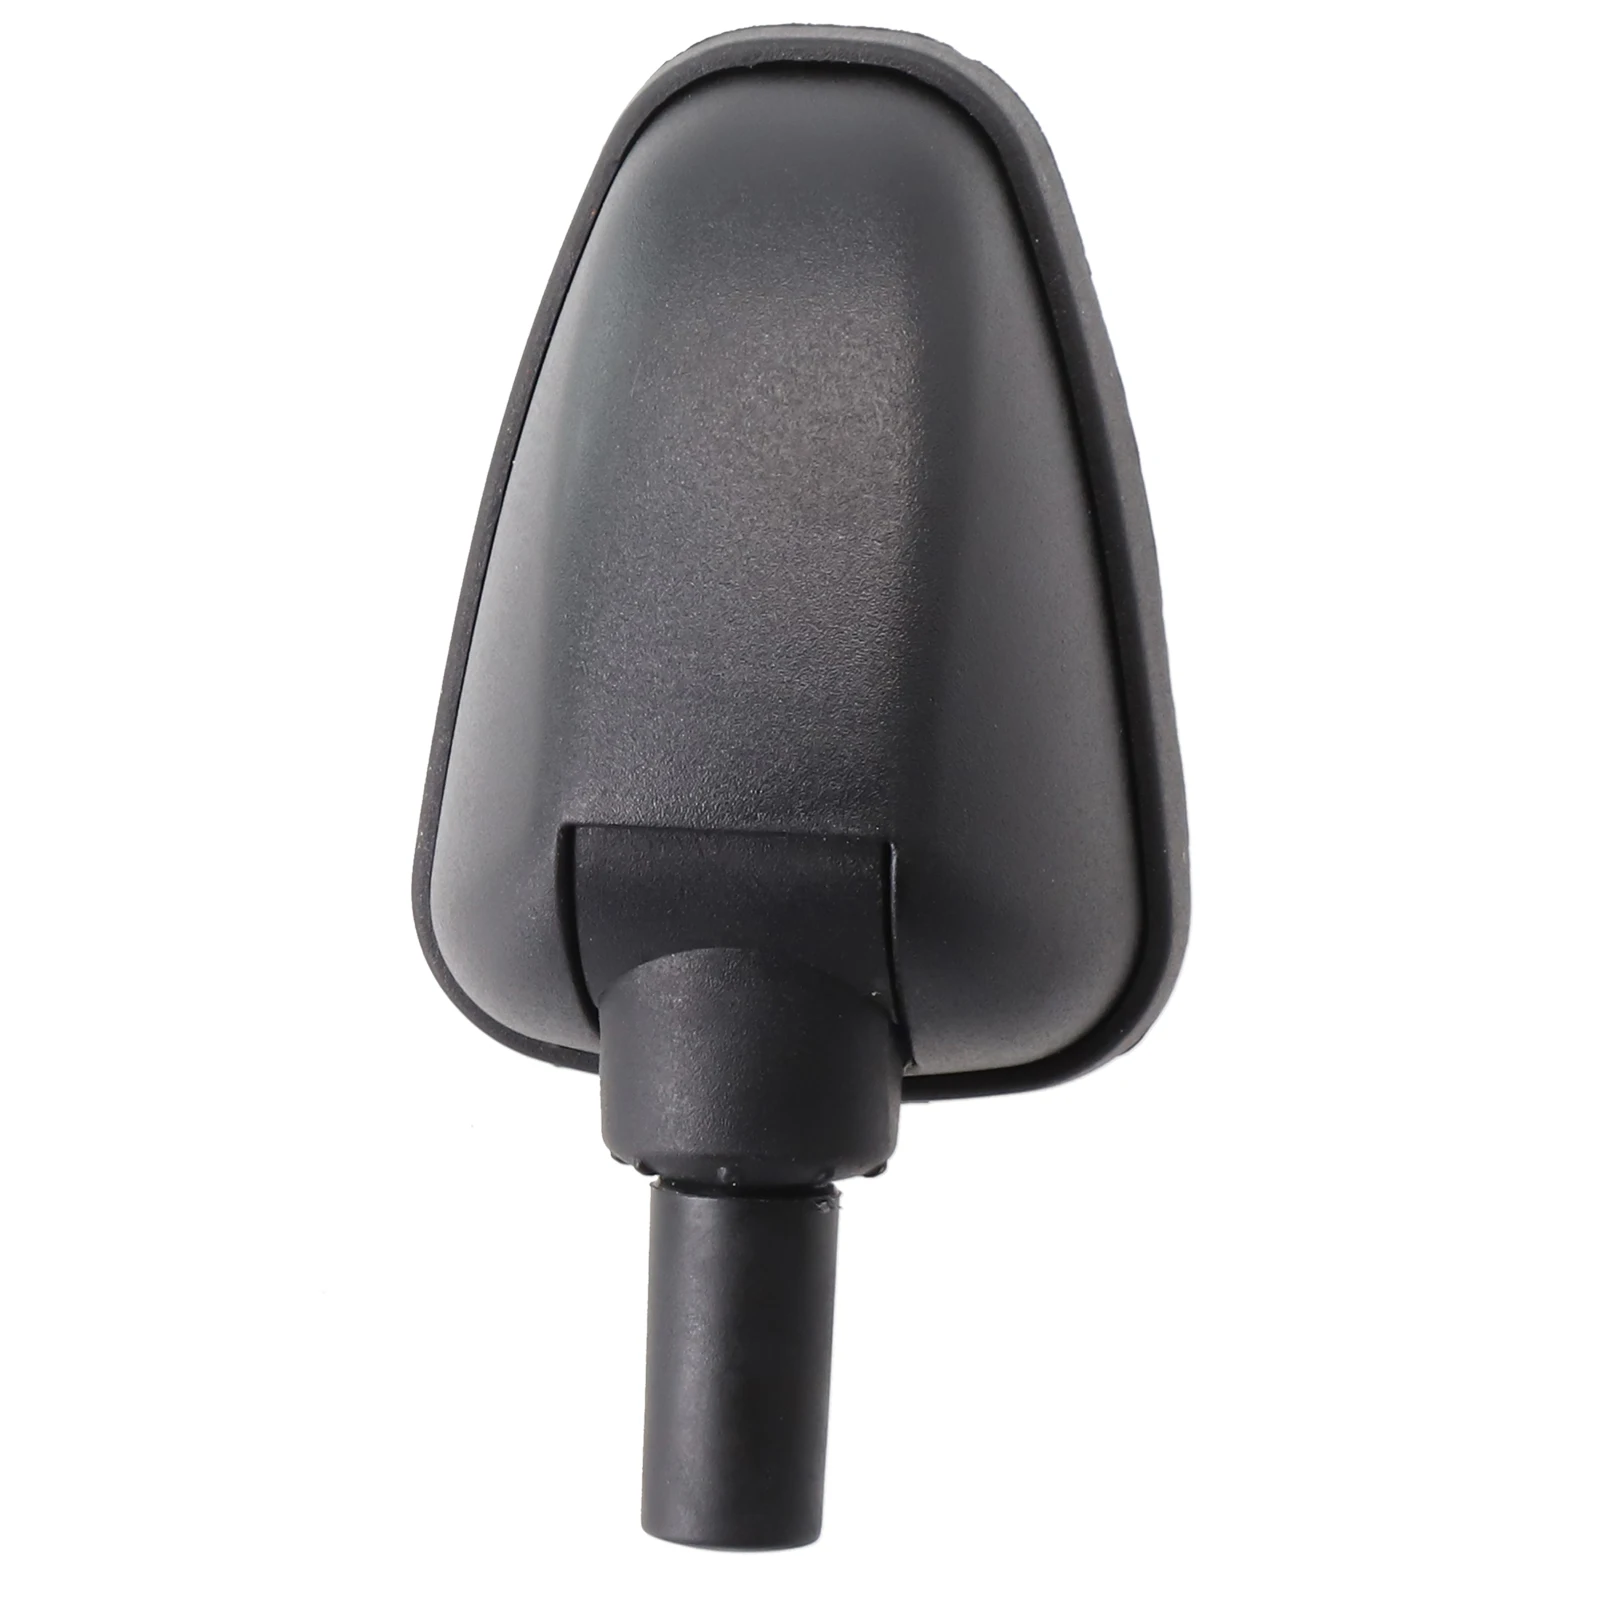 For Hyundai For Kia Roof Antenna 2007-2009 Fits For Hyundai I10 Roof Antenna Assembly Black 96210-07010